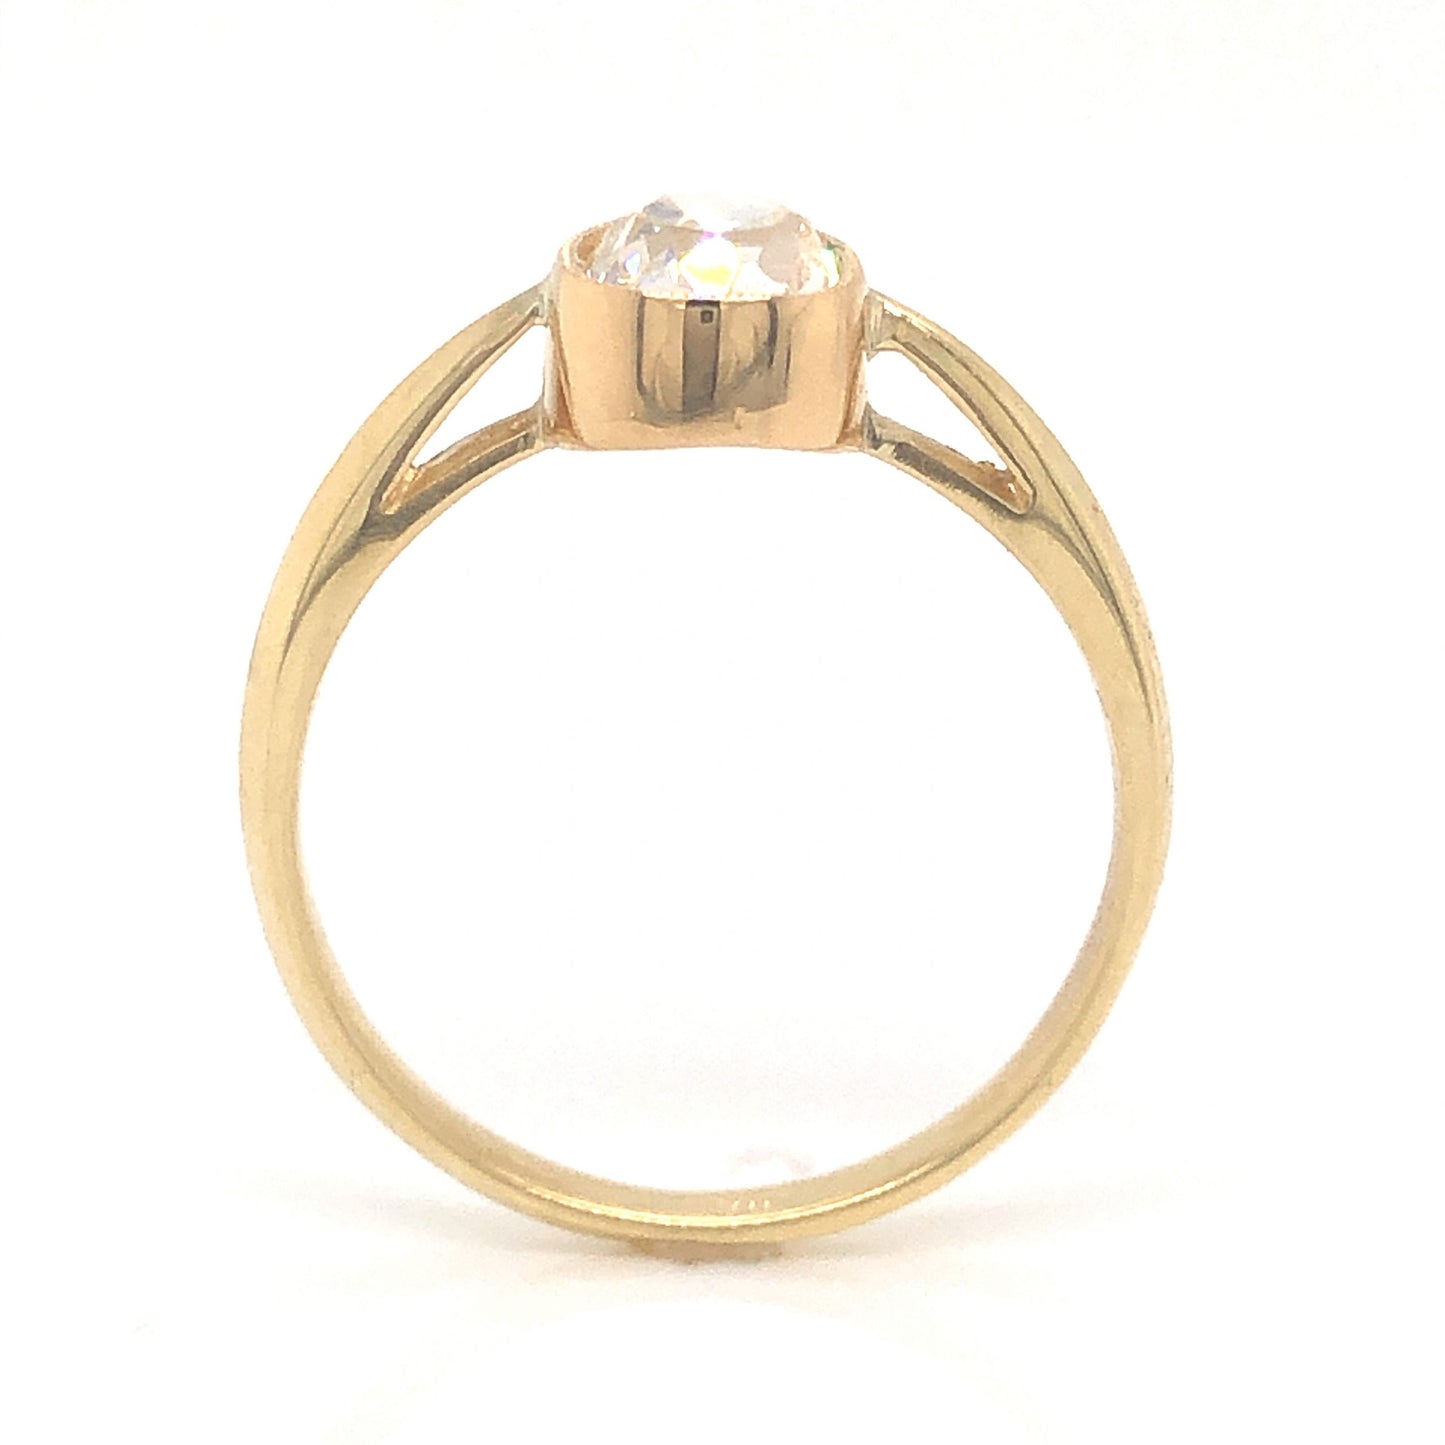 Solitaire Bezel Set Diamond Engagement Ring in 18k Yellow Gold